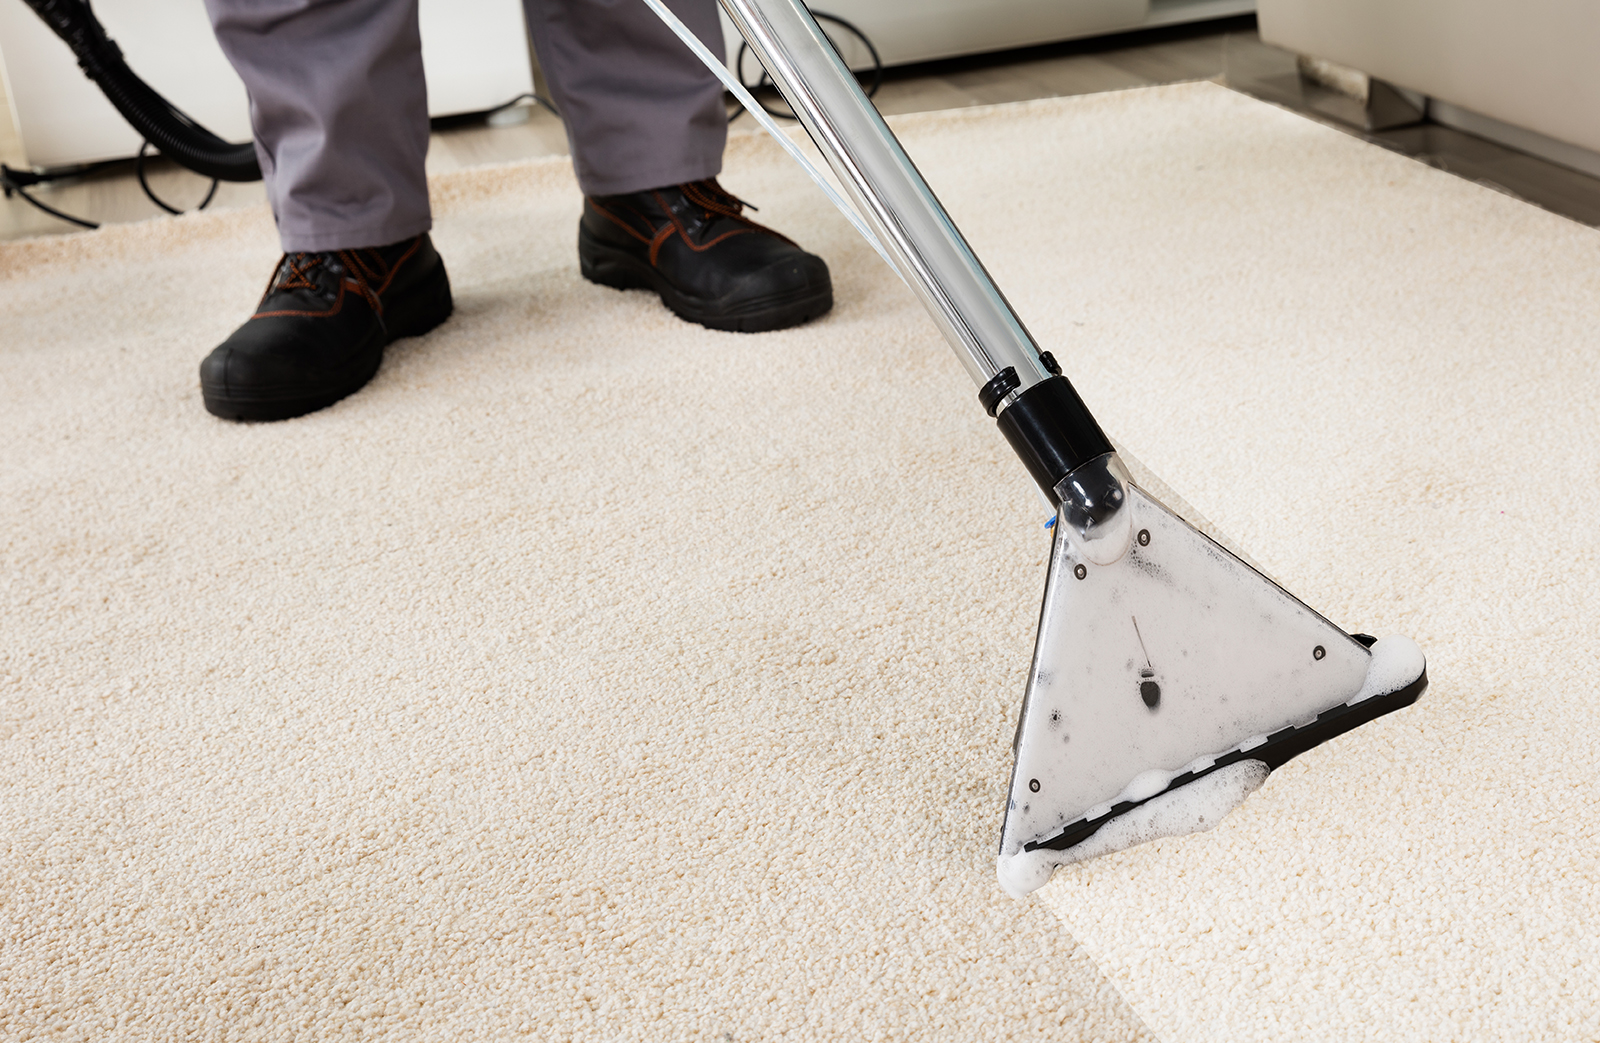 TOP REASONS TO HIRE A PROFESSIONAL NJ / PA CARPET CLEANING PROFESSIONAL